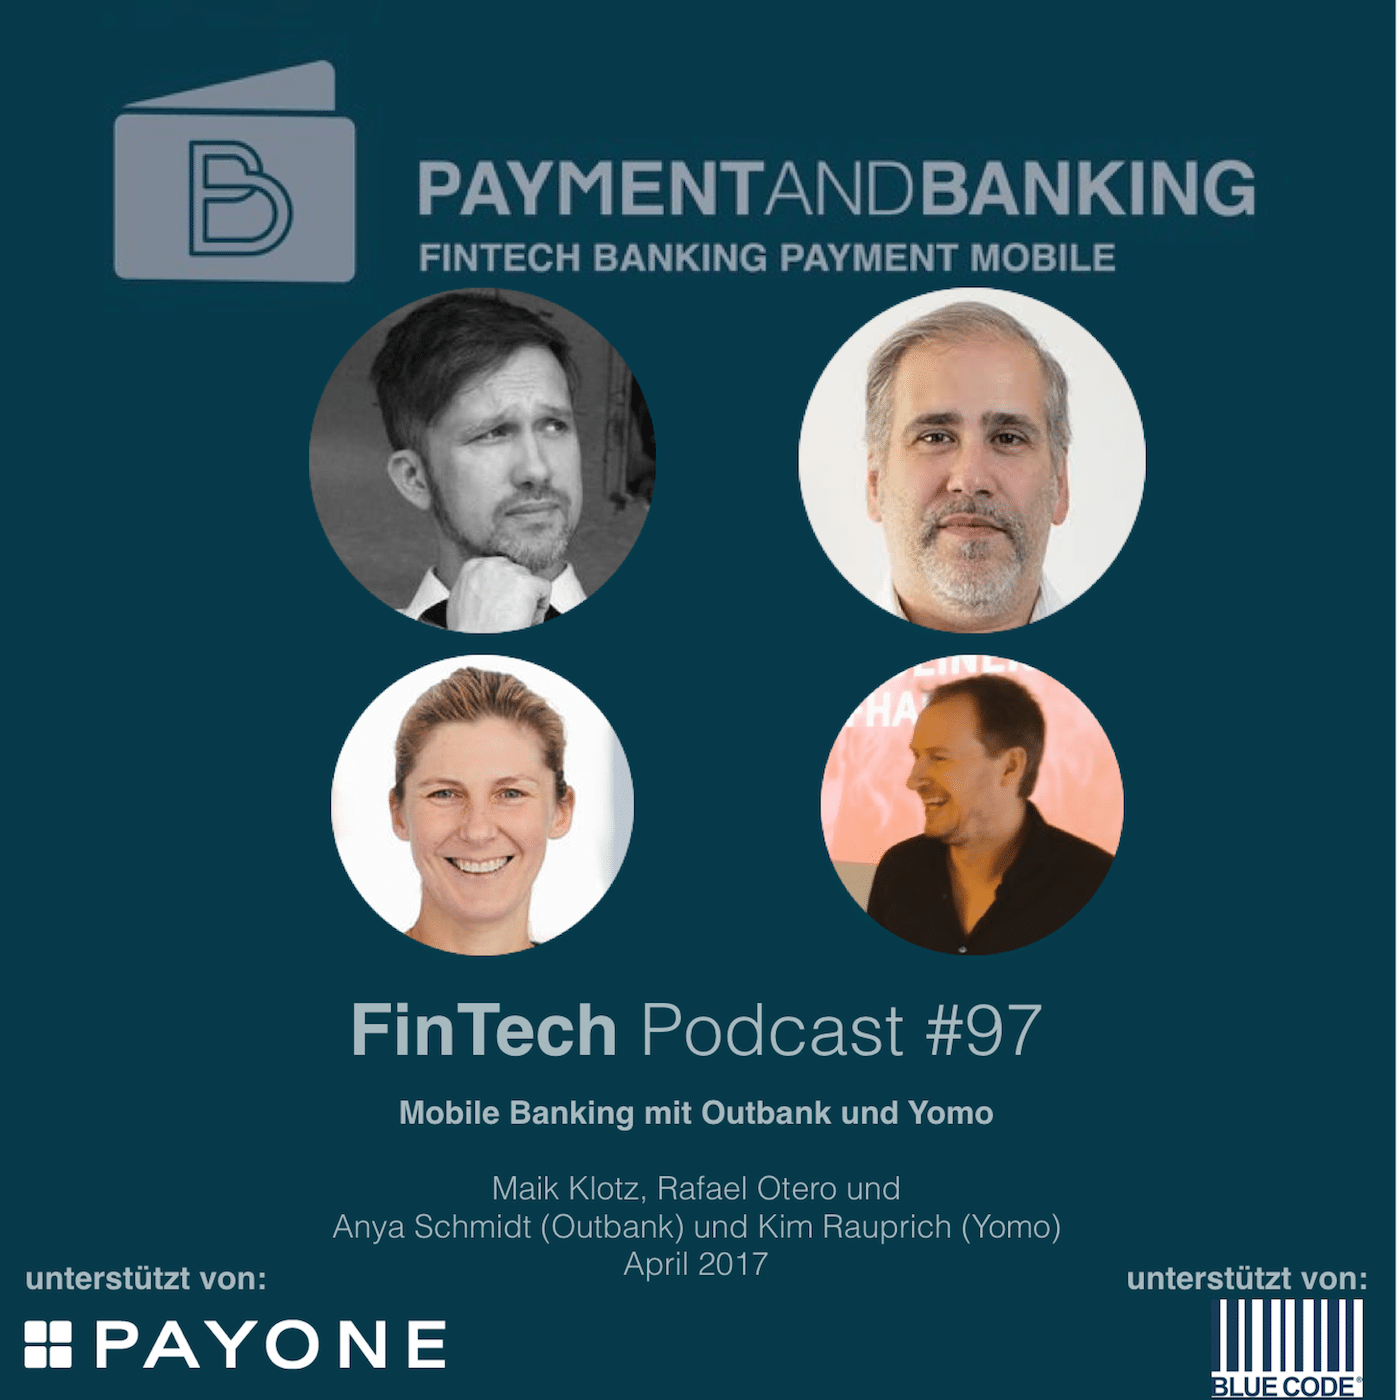 FinTech Podcast #97 - Yomo und Outbank